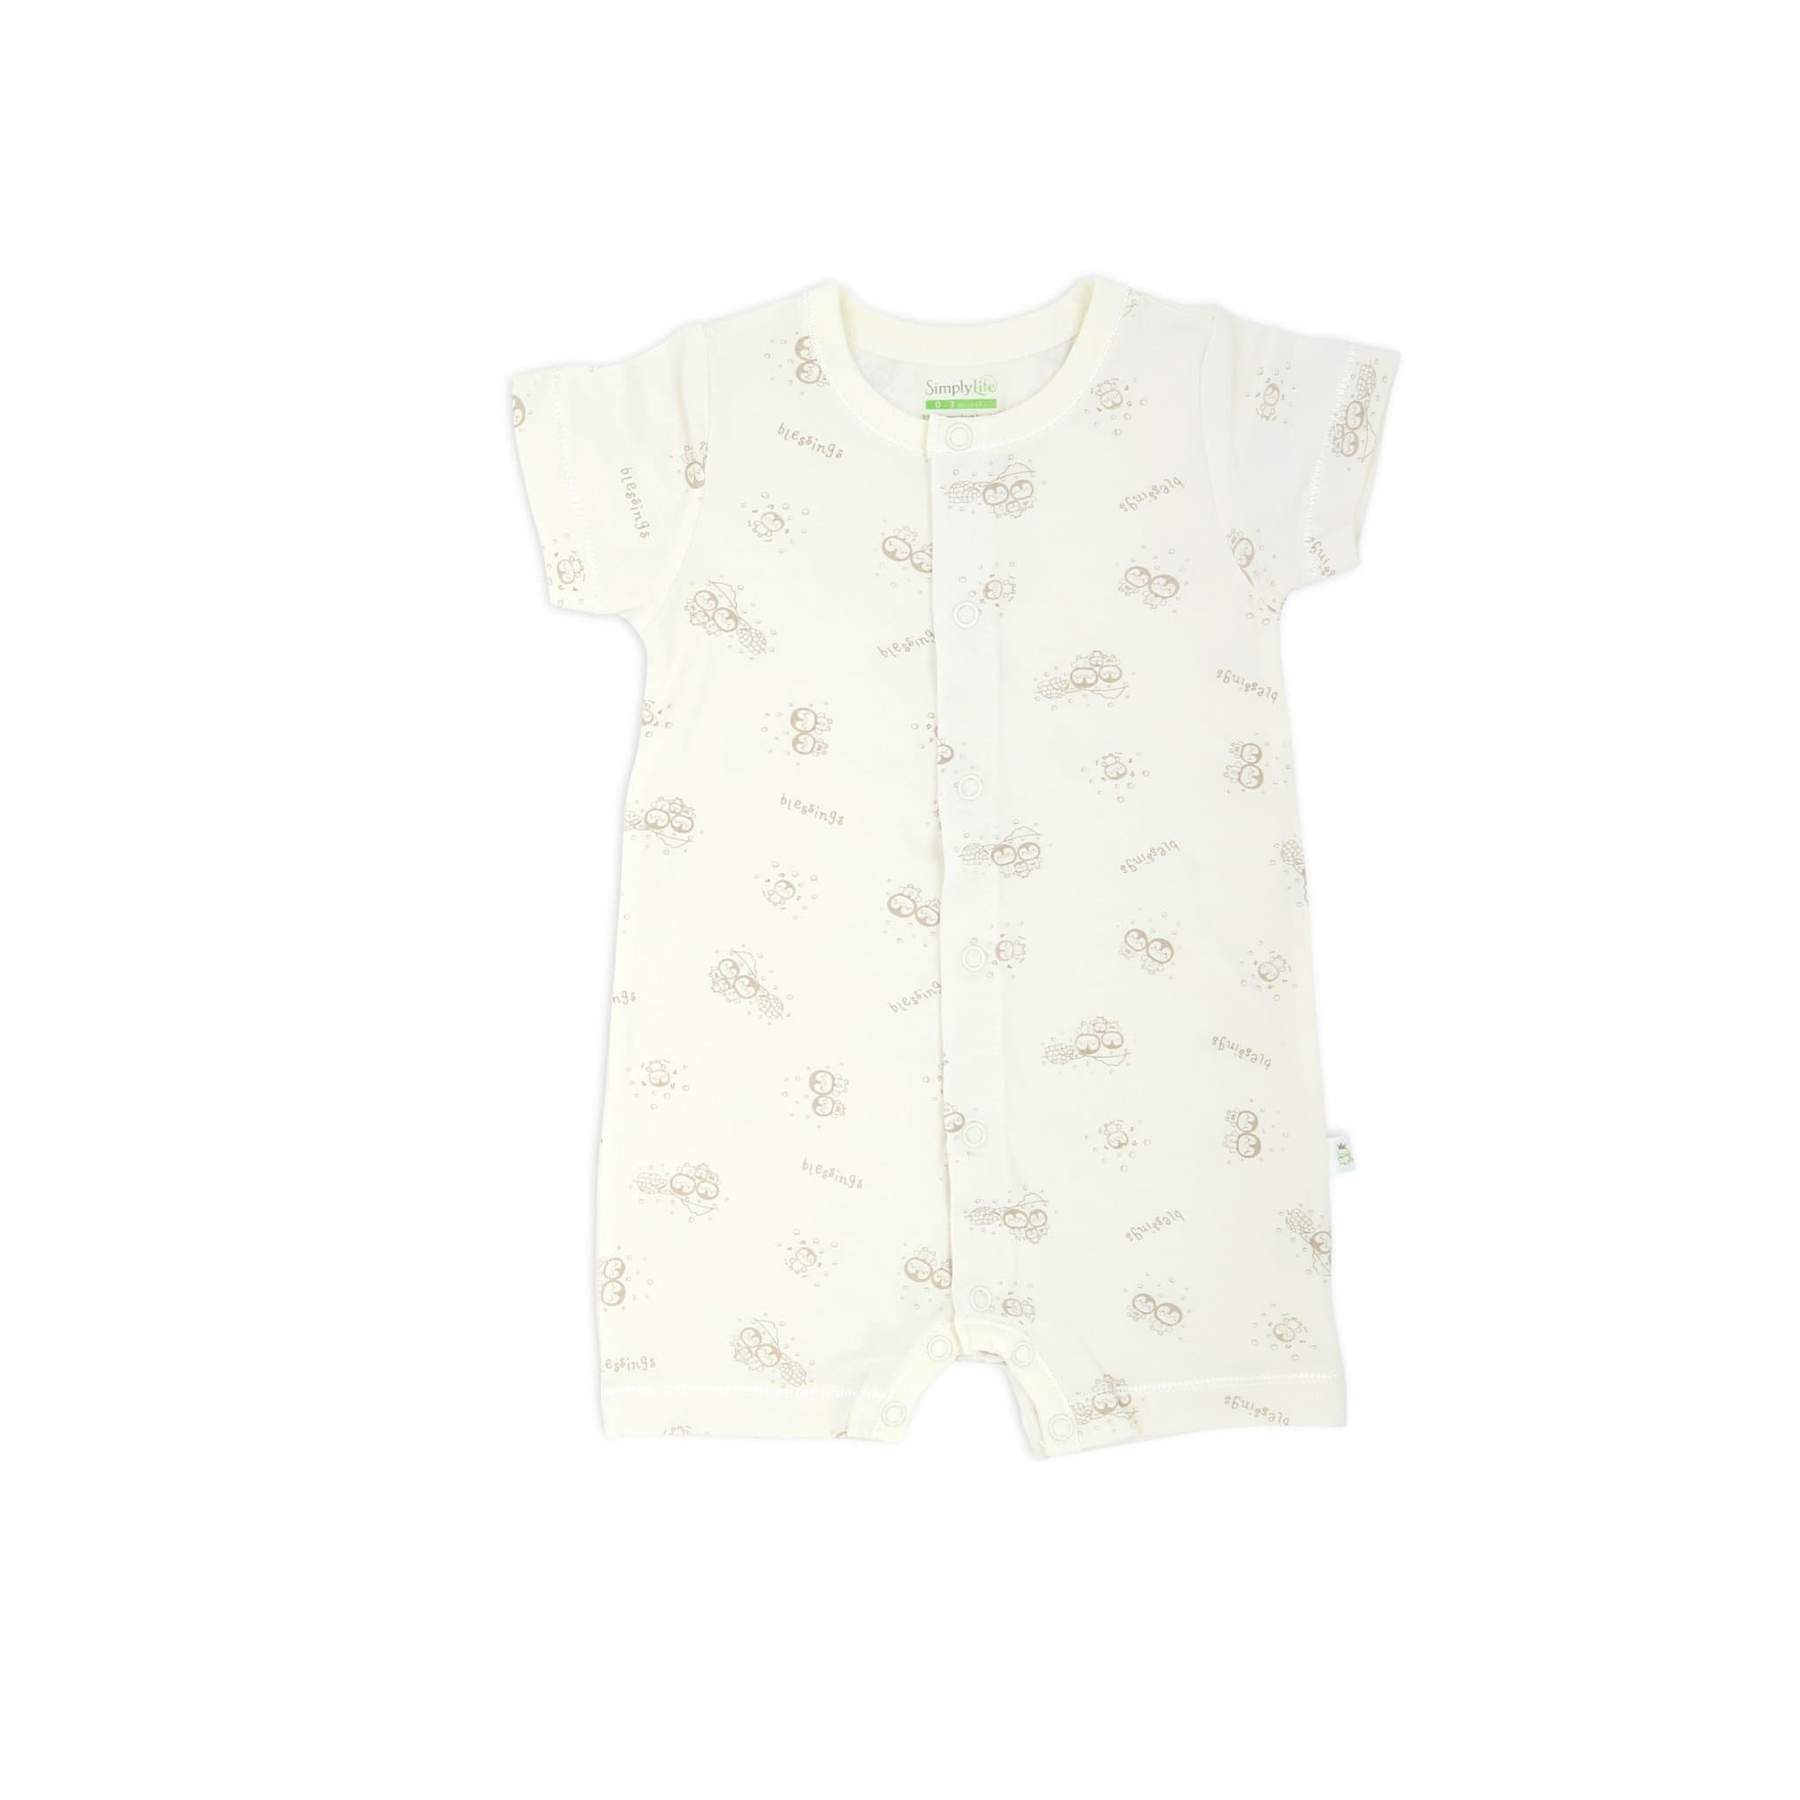 Simply Life Bamboo Shortall Short-Sleeved with Front Snap Buttons Blessed Penguin (6-9 months)